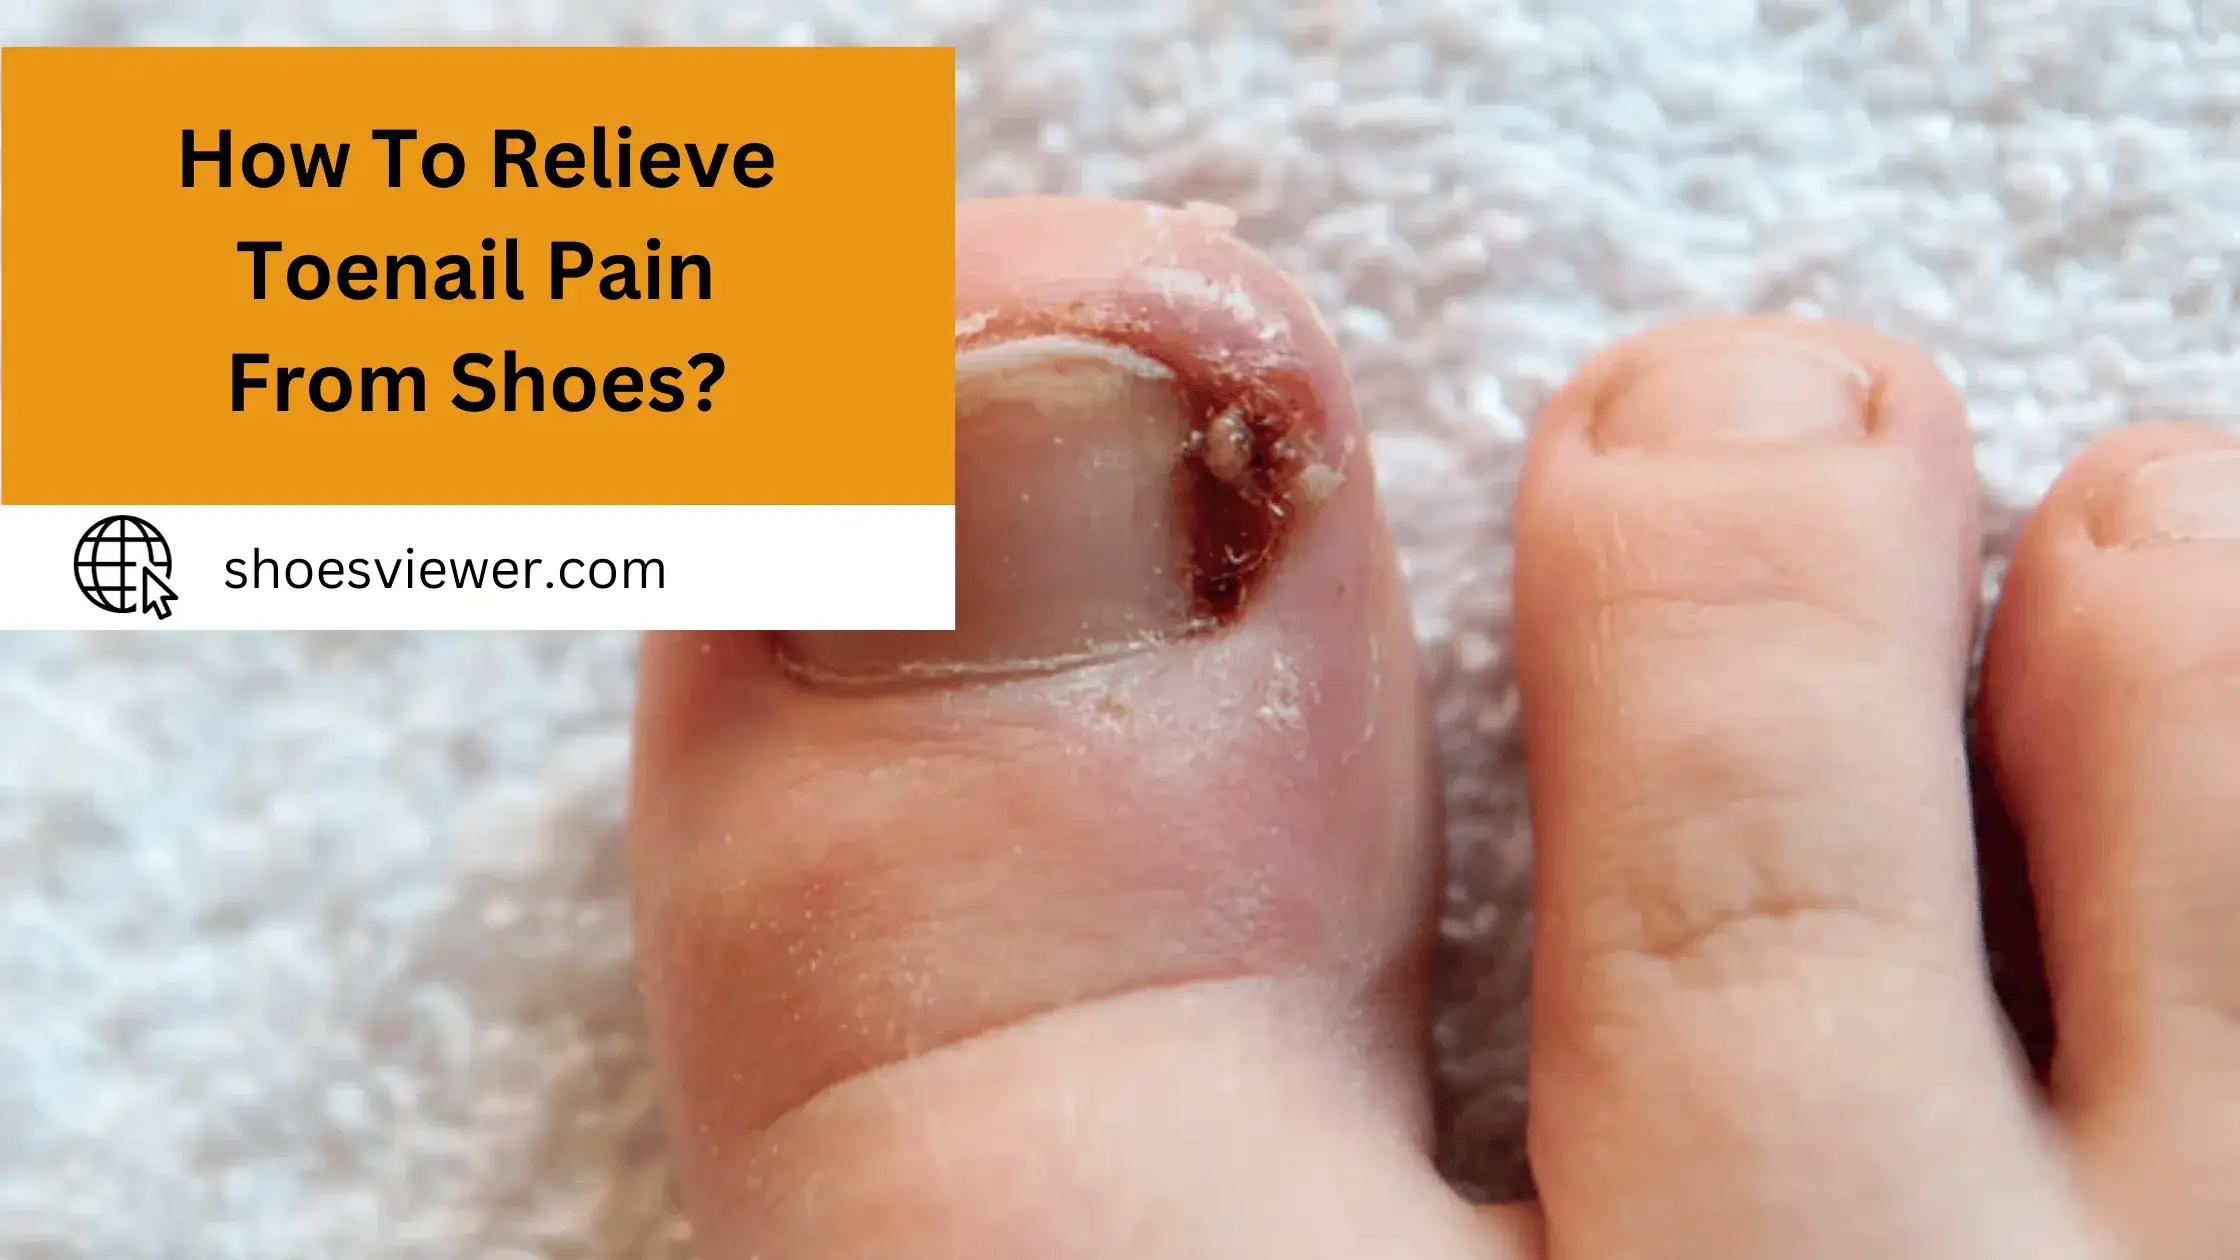 How To Relieve Toenail Pain From Shoes? Pro Tips